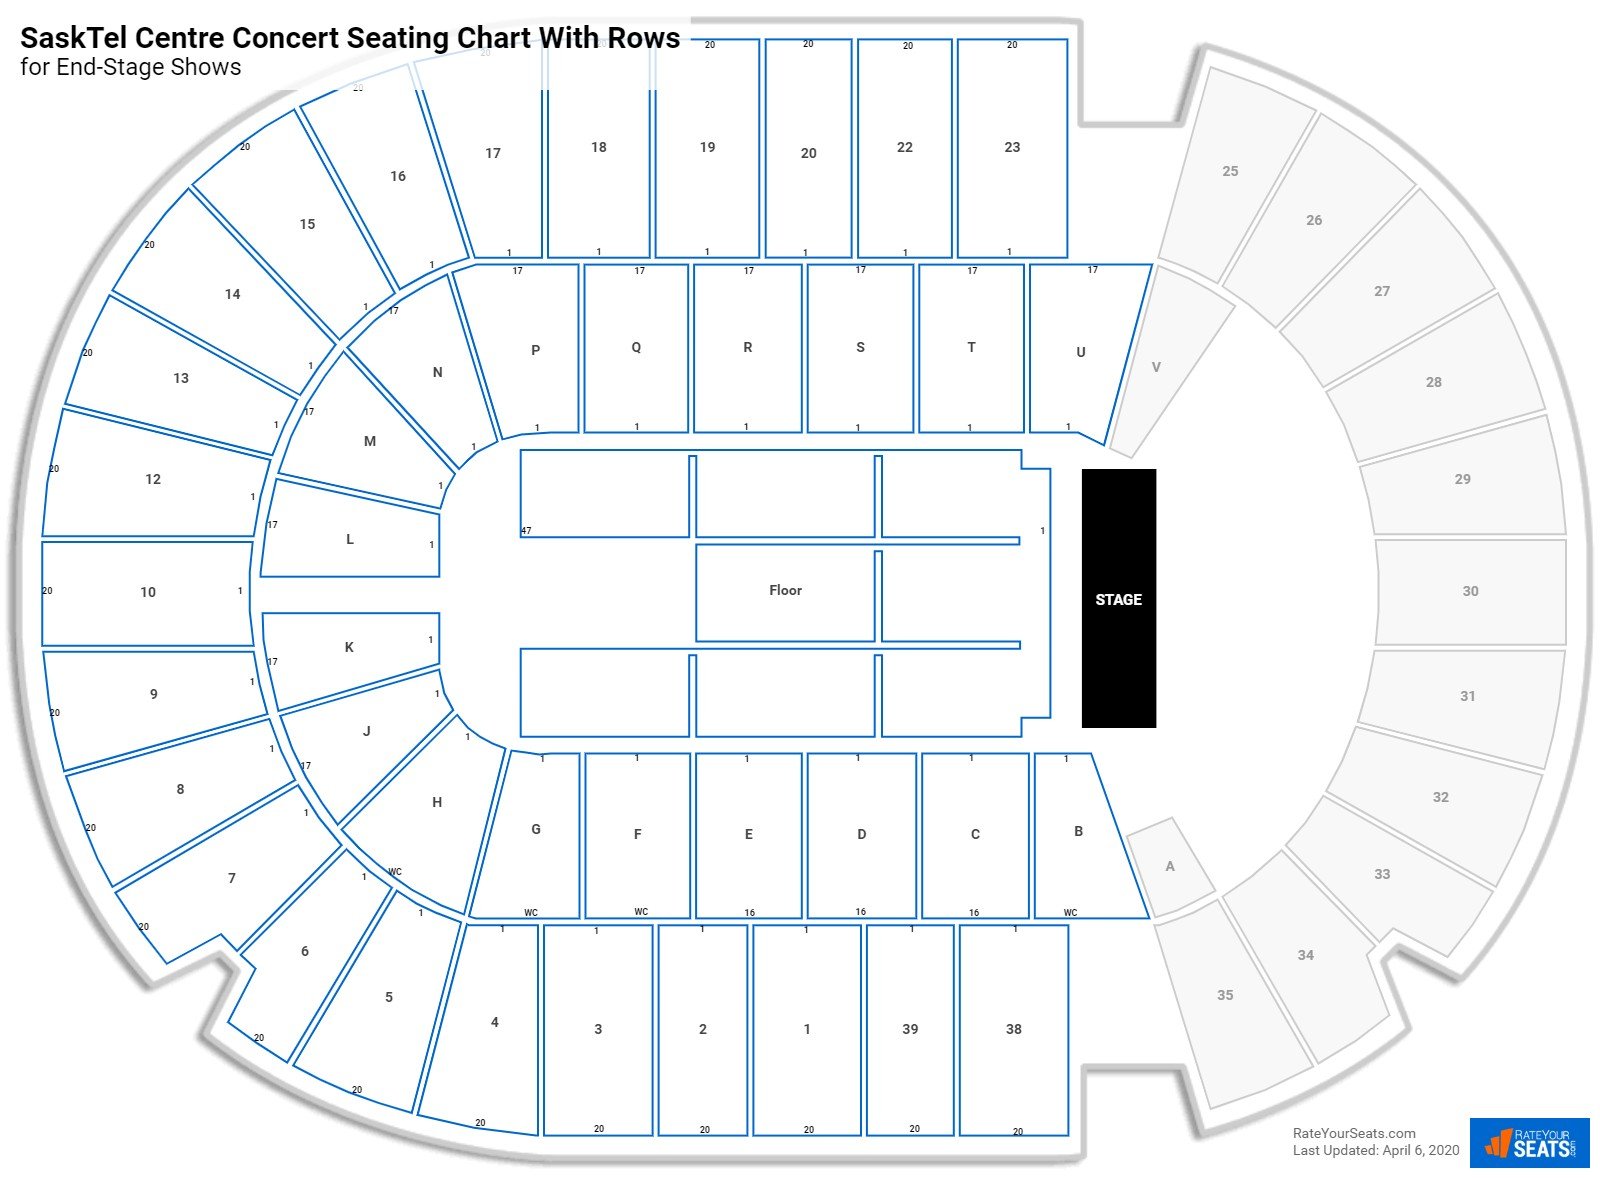 SaskTel Centre seating chart with row numbers